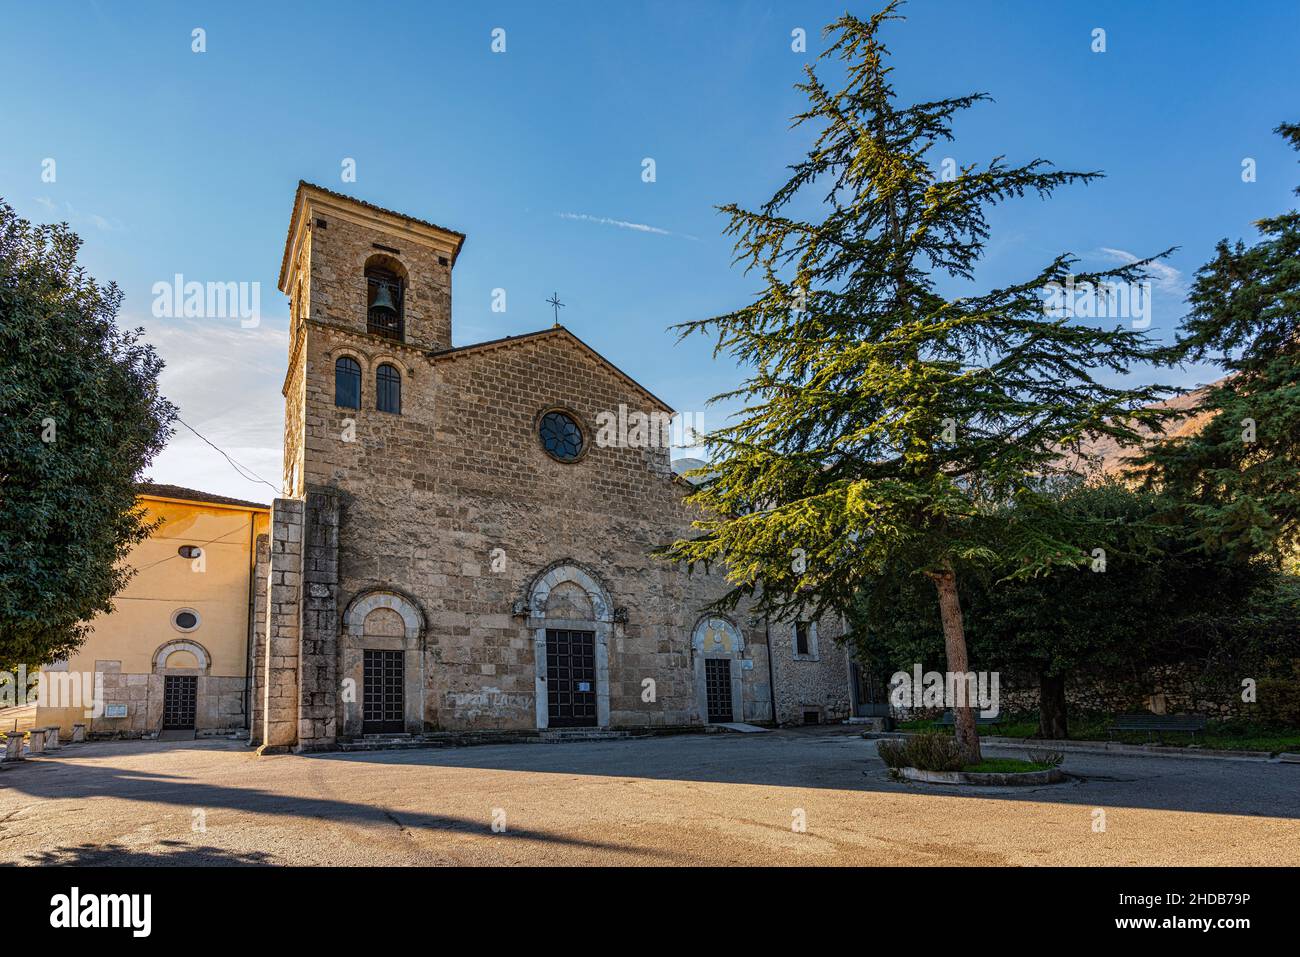 Facade with bell tower of the co-cathedral of Santa Maria Assunta in Cielo and Porta Santa. Venafro, Province of Isernia, Molise, Italy, Europe Stock Photo